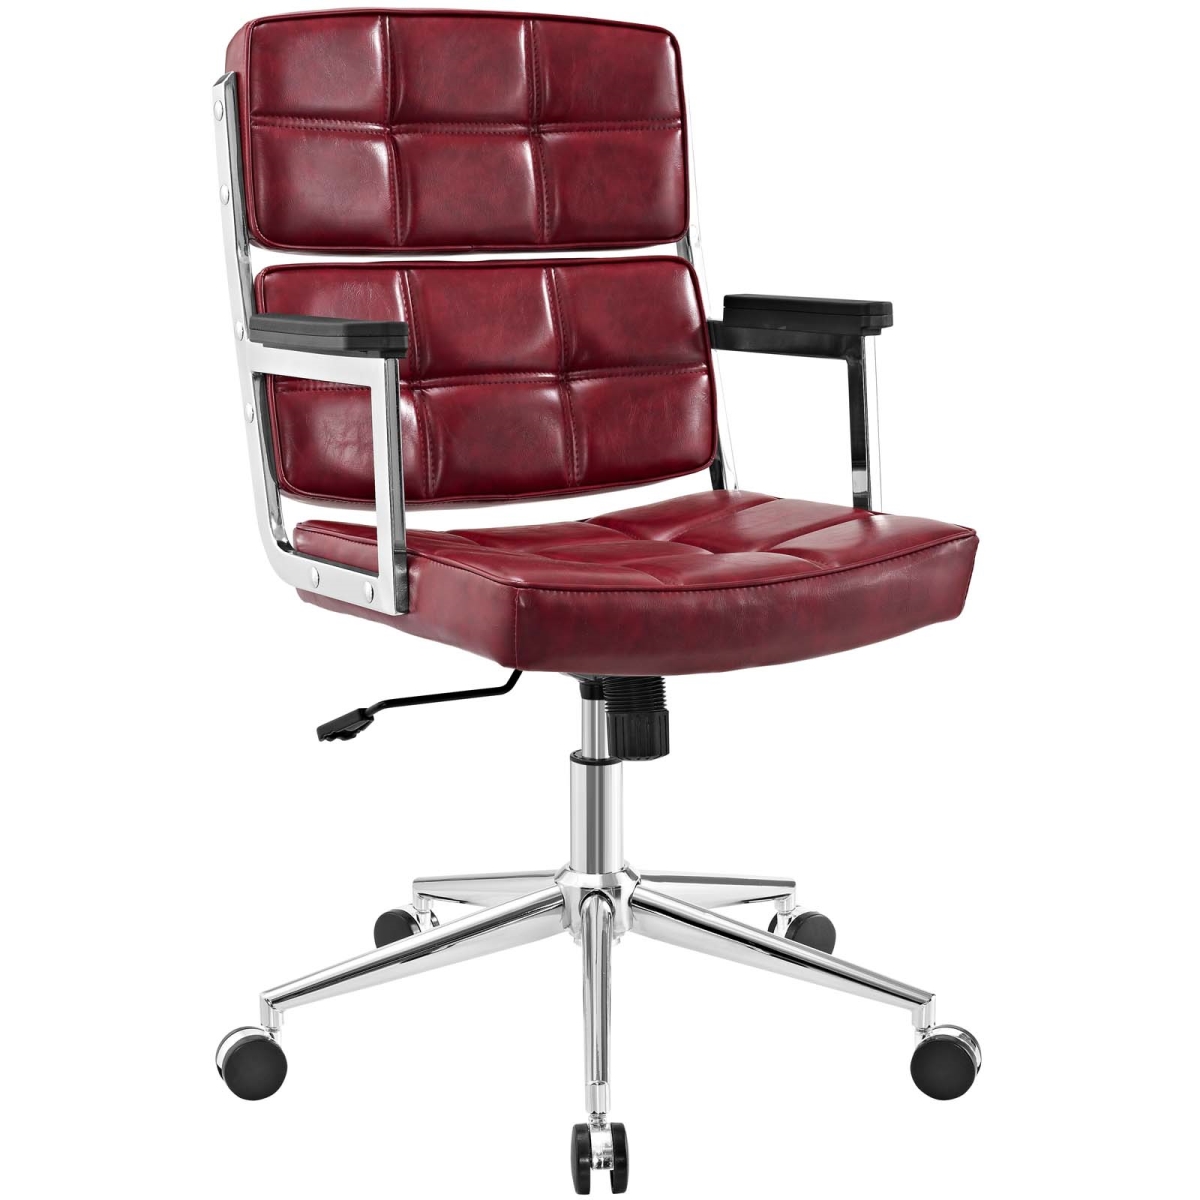 Modway Eei-2685-red 37 - 39.5 H X 26 W X 25 L In. Portray Highback Upholstered Vinyl Office Chair, Red